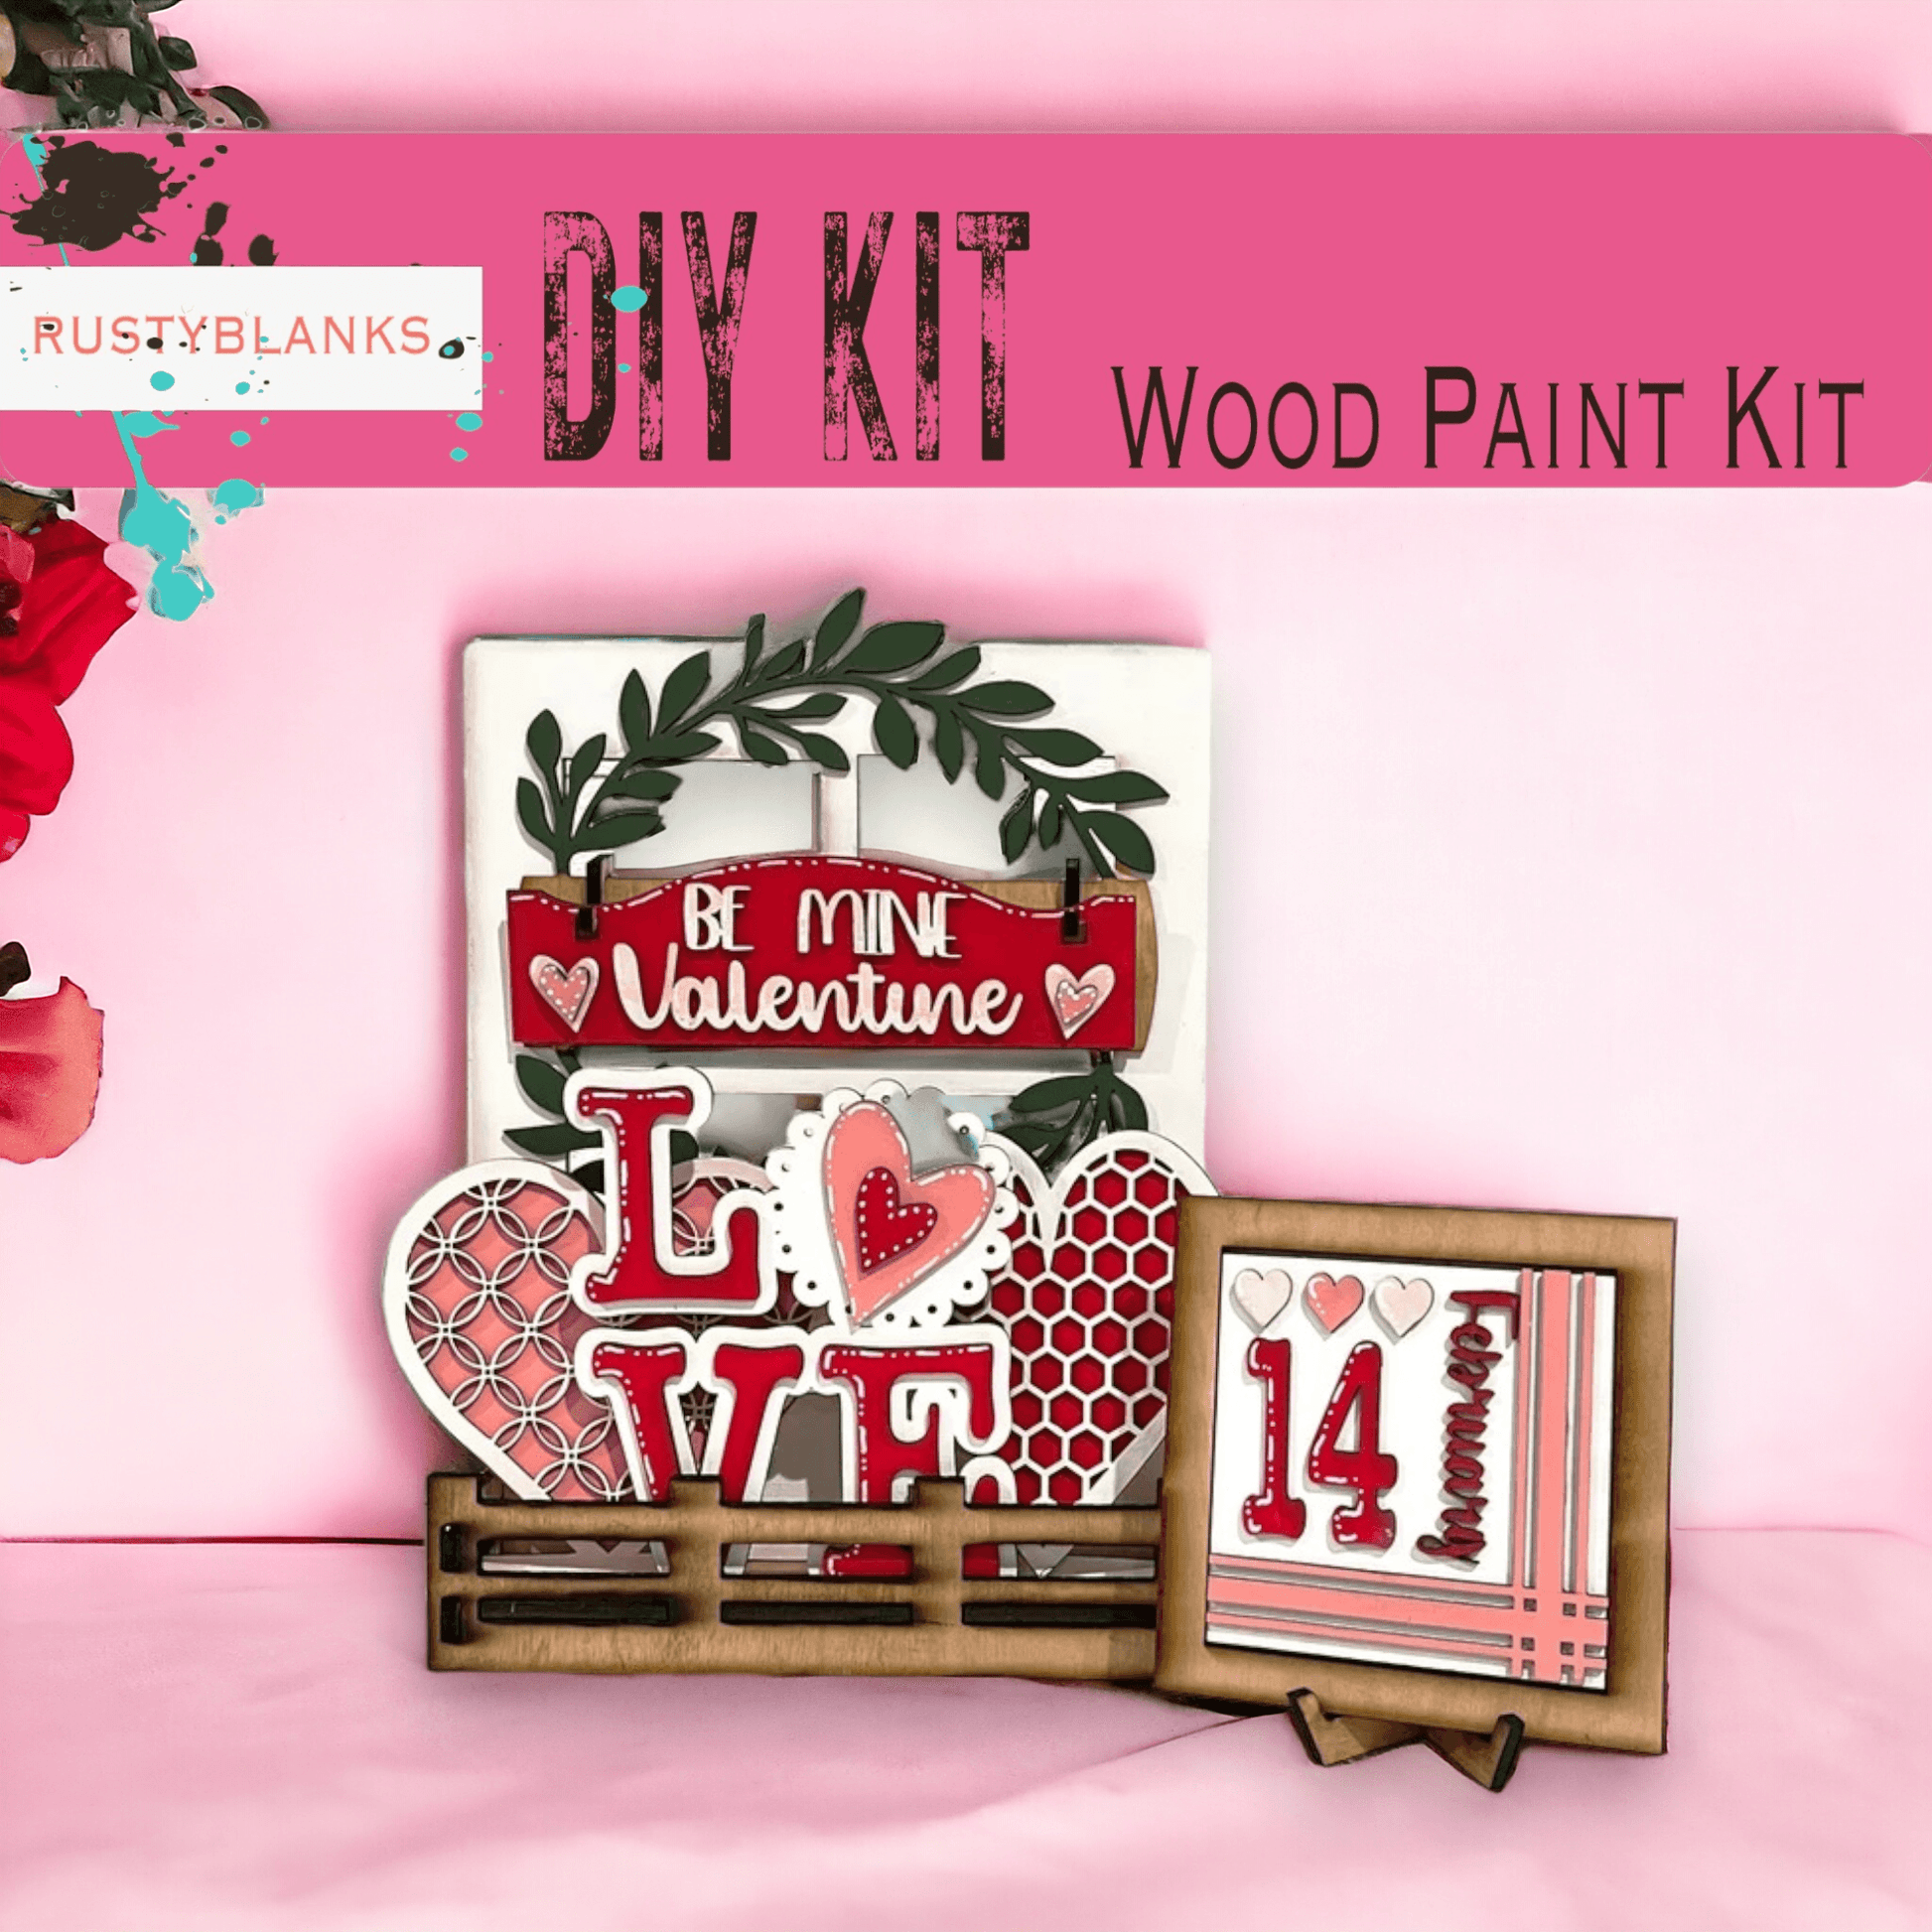 Be Mine Valentine for our Interchangeable Inserts for our Window or House DIY Kit - RusticFarmhouseDecor